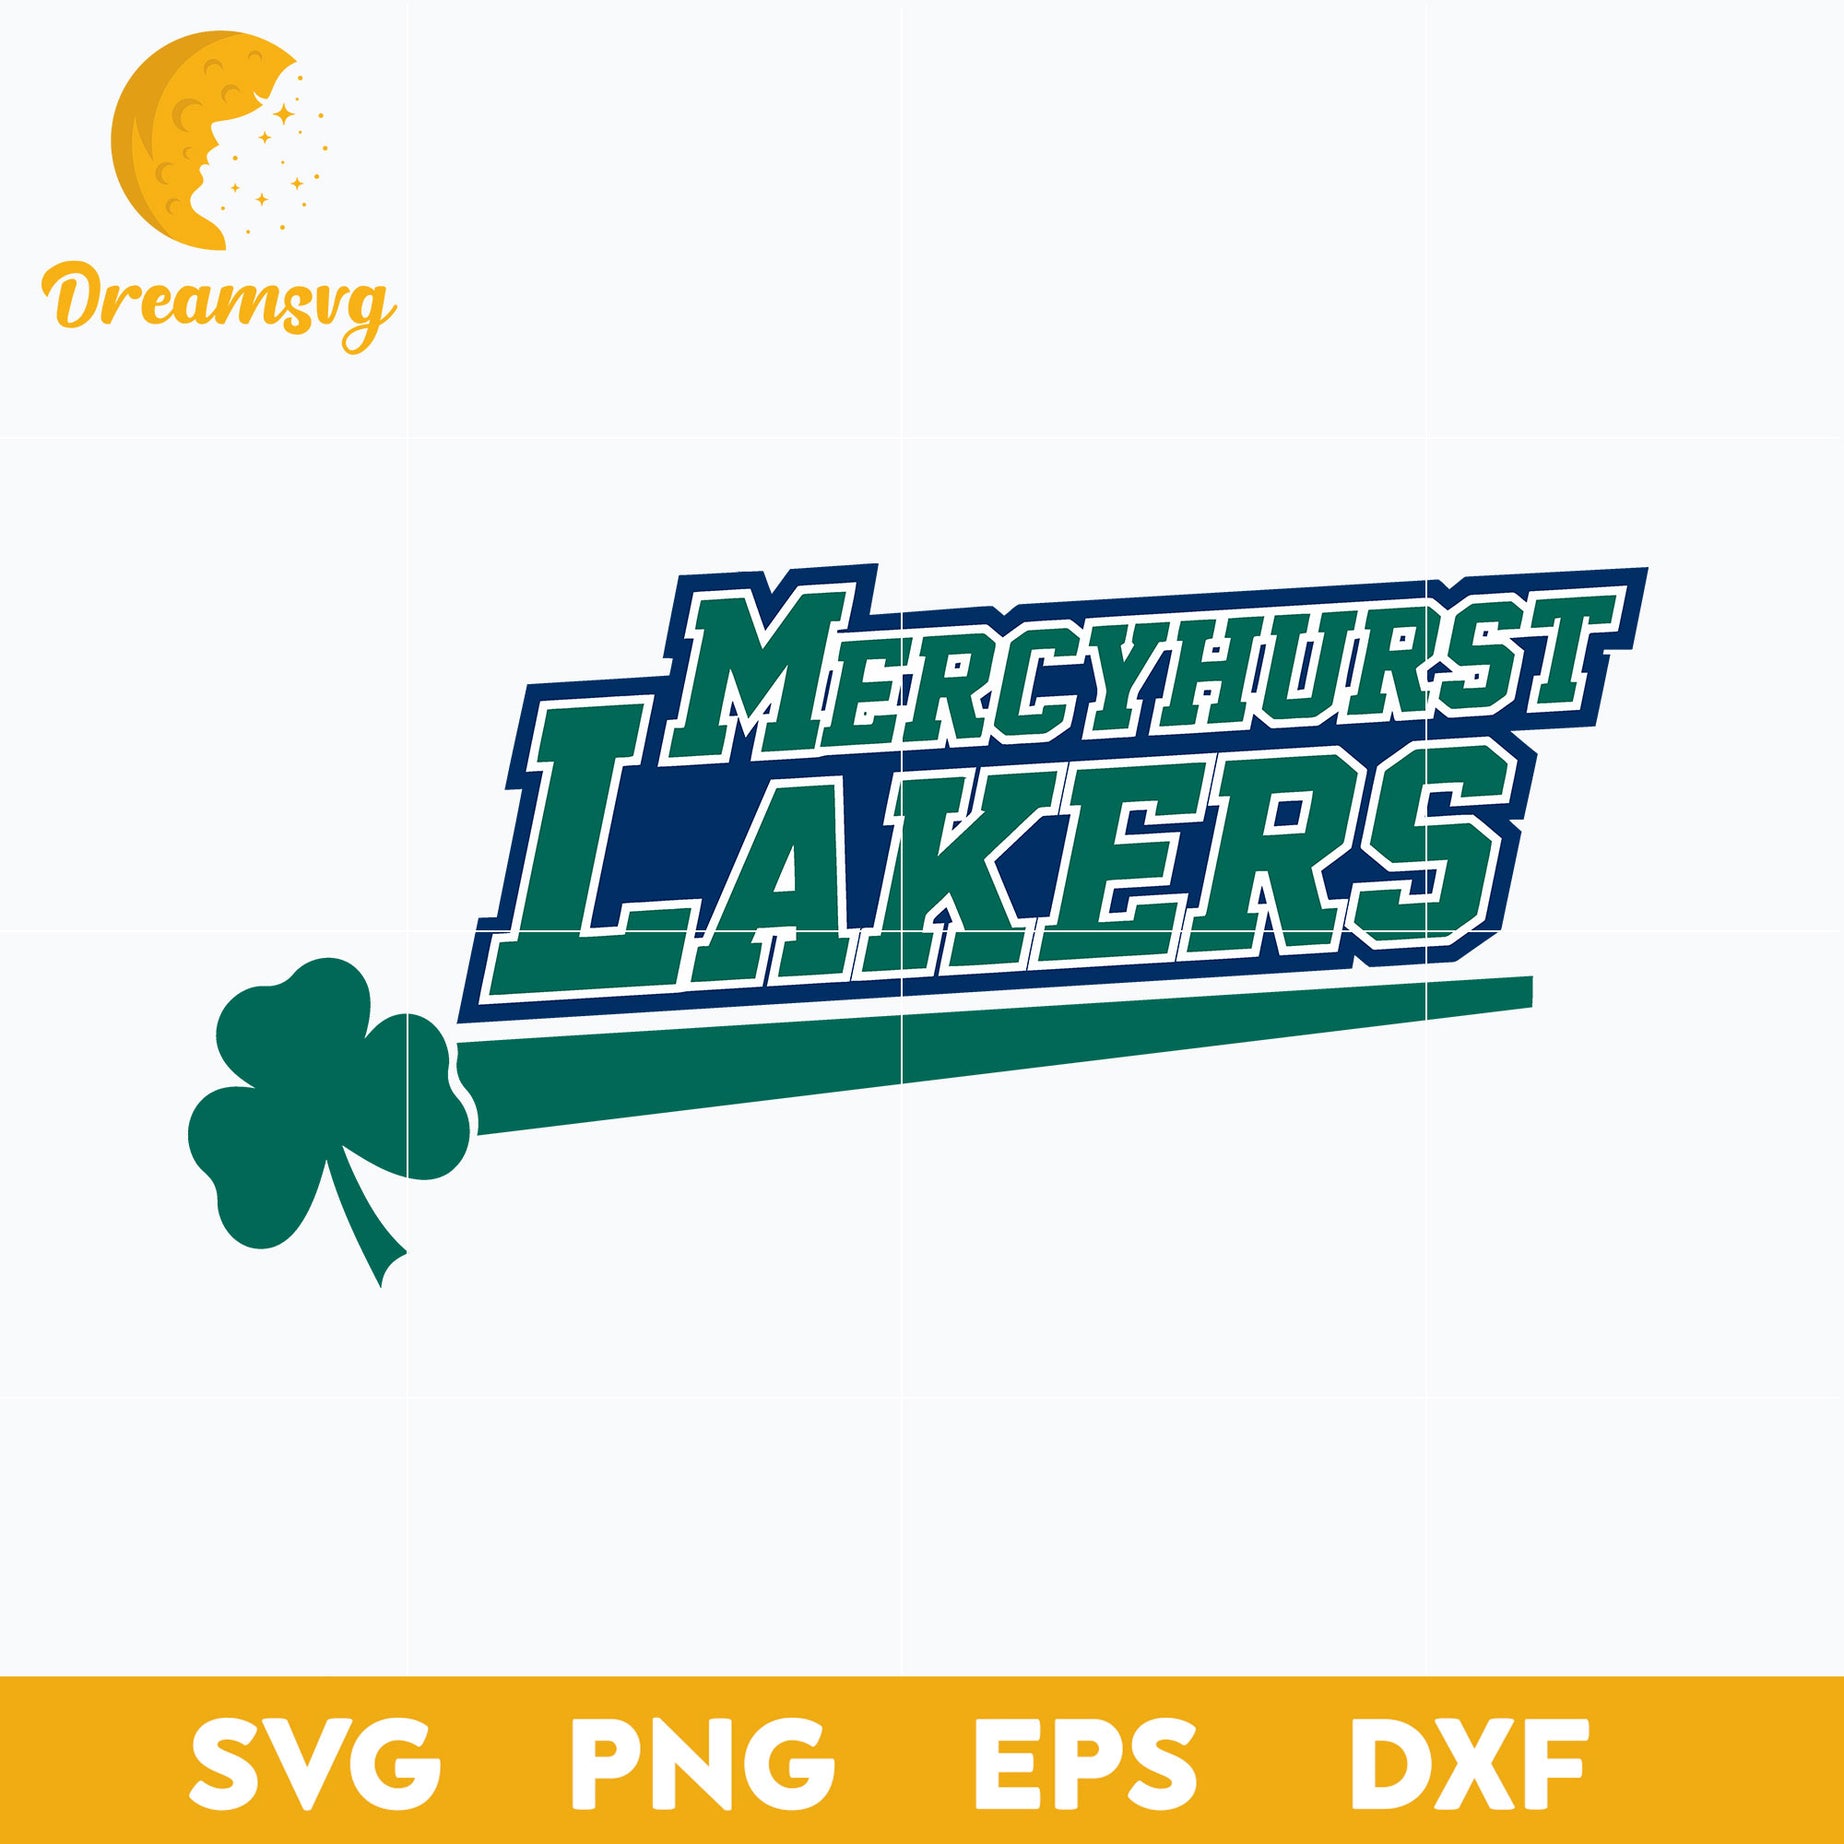 Mercyhurst Lakers Svg, Logo Ncaa Sport Svg, Ncaa Svg, Png, Dxf, Eps Download File.